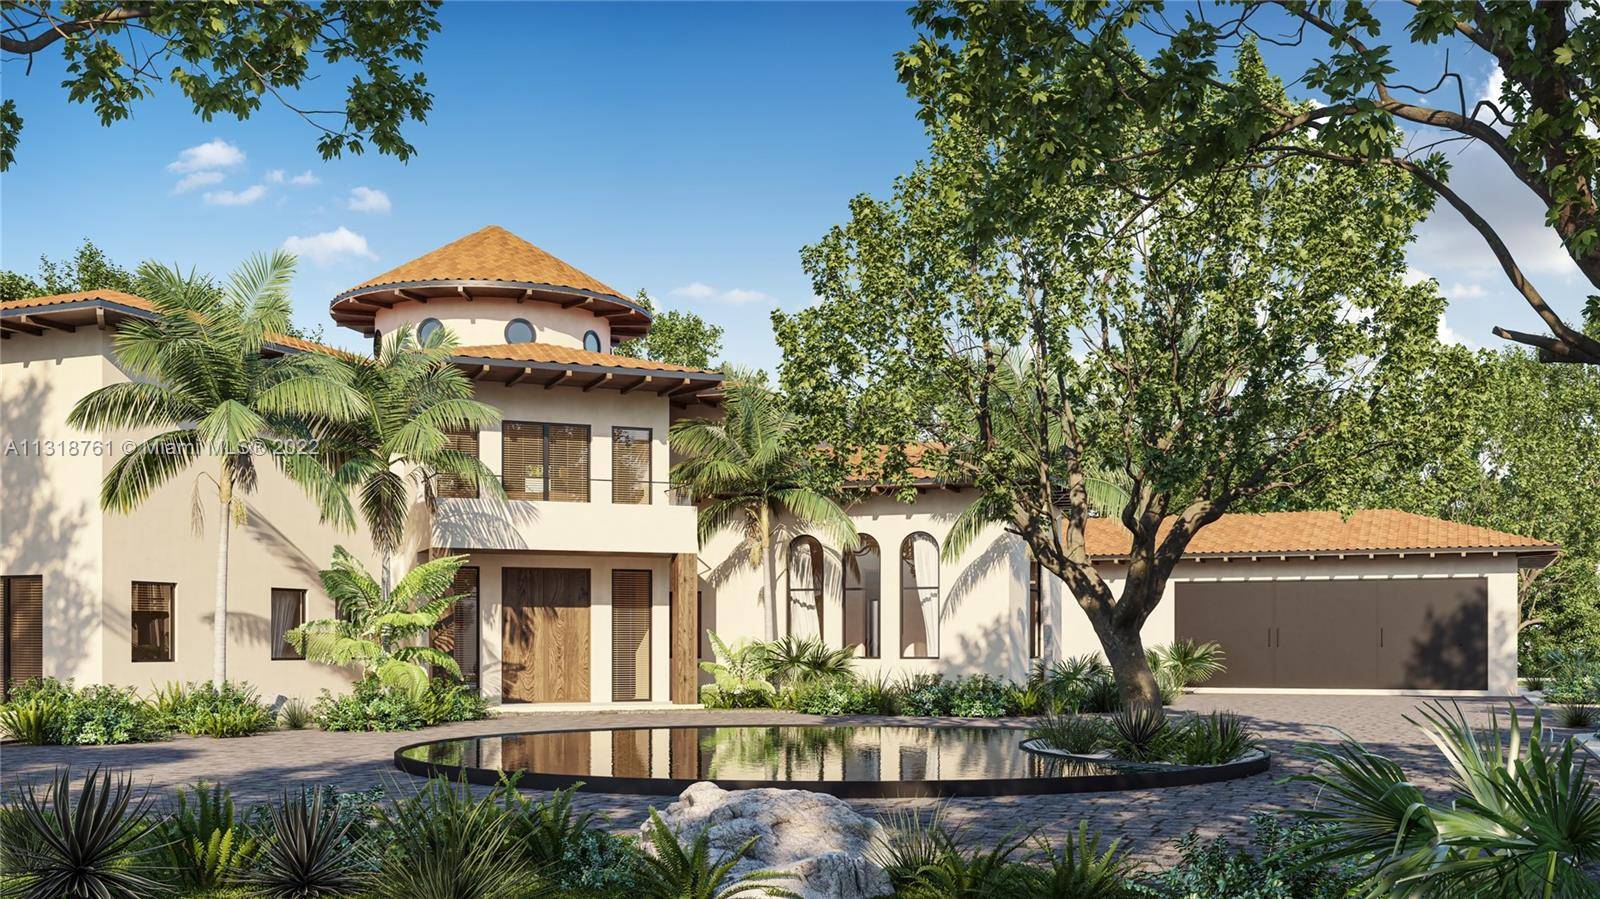 This magnificent property in Pinecrest, sitting on a generous 40, 946 sq ft lot, is under construction with a slated completion of Spring '24.